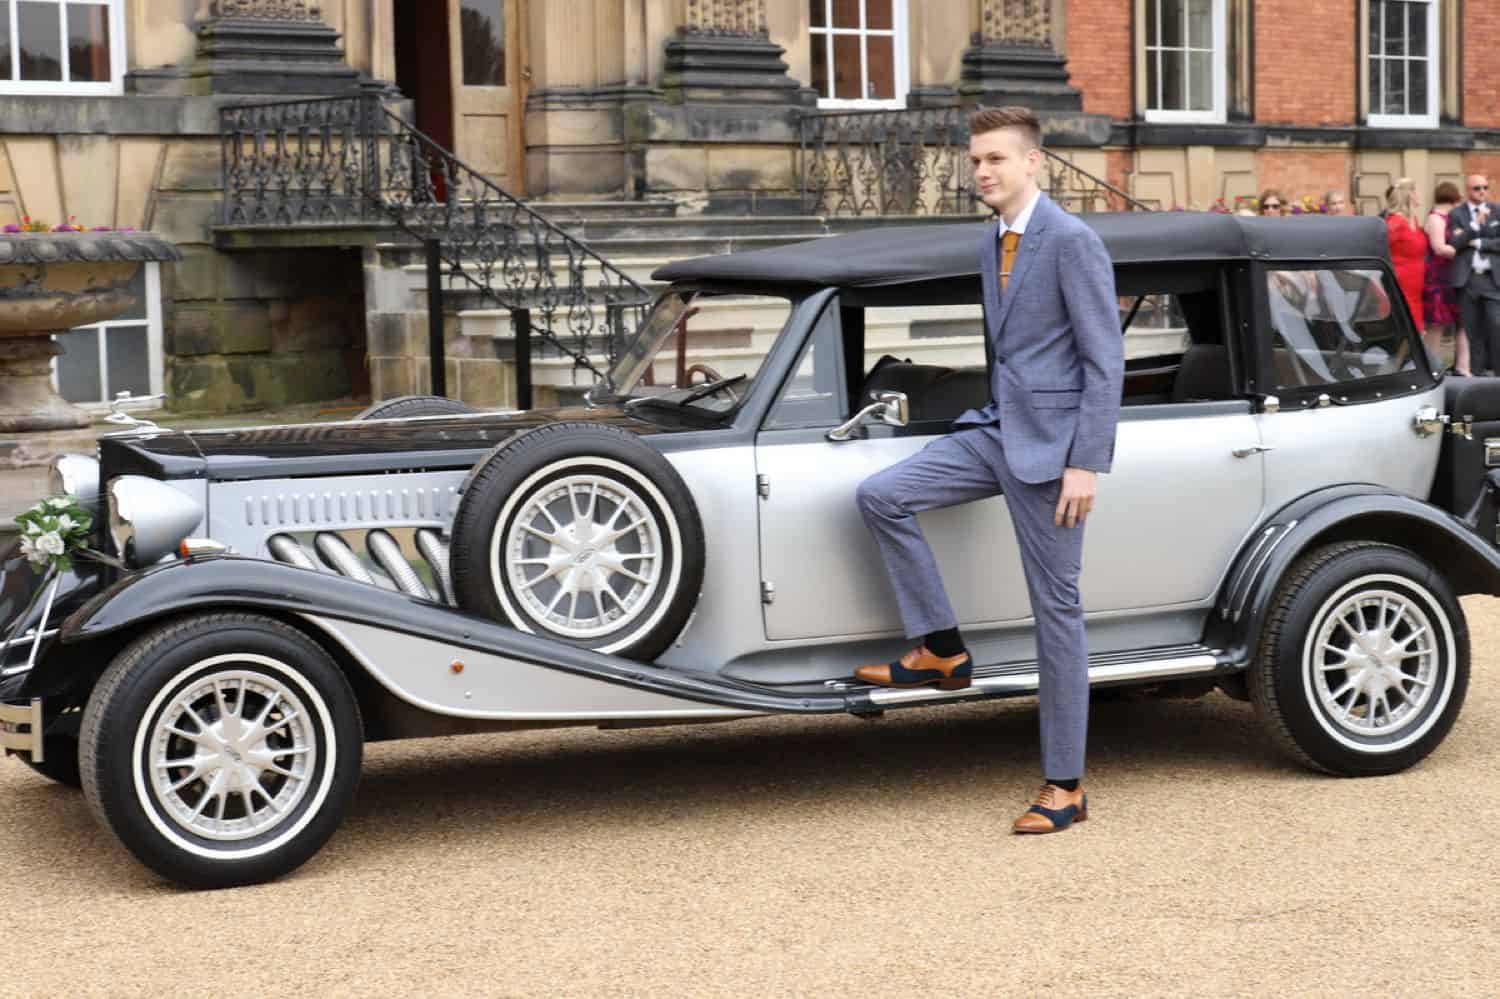 A high school senior boy poses for his prom photography beside a vintage car.